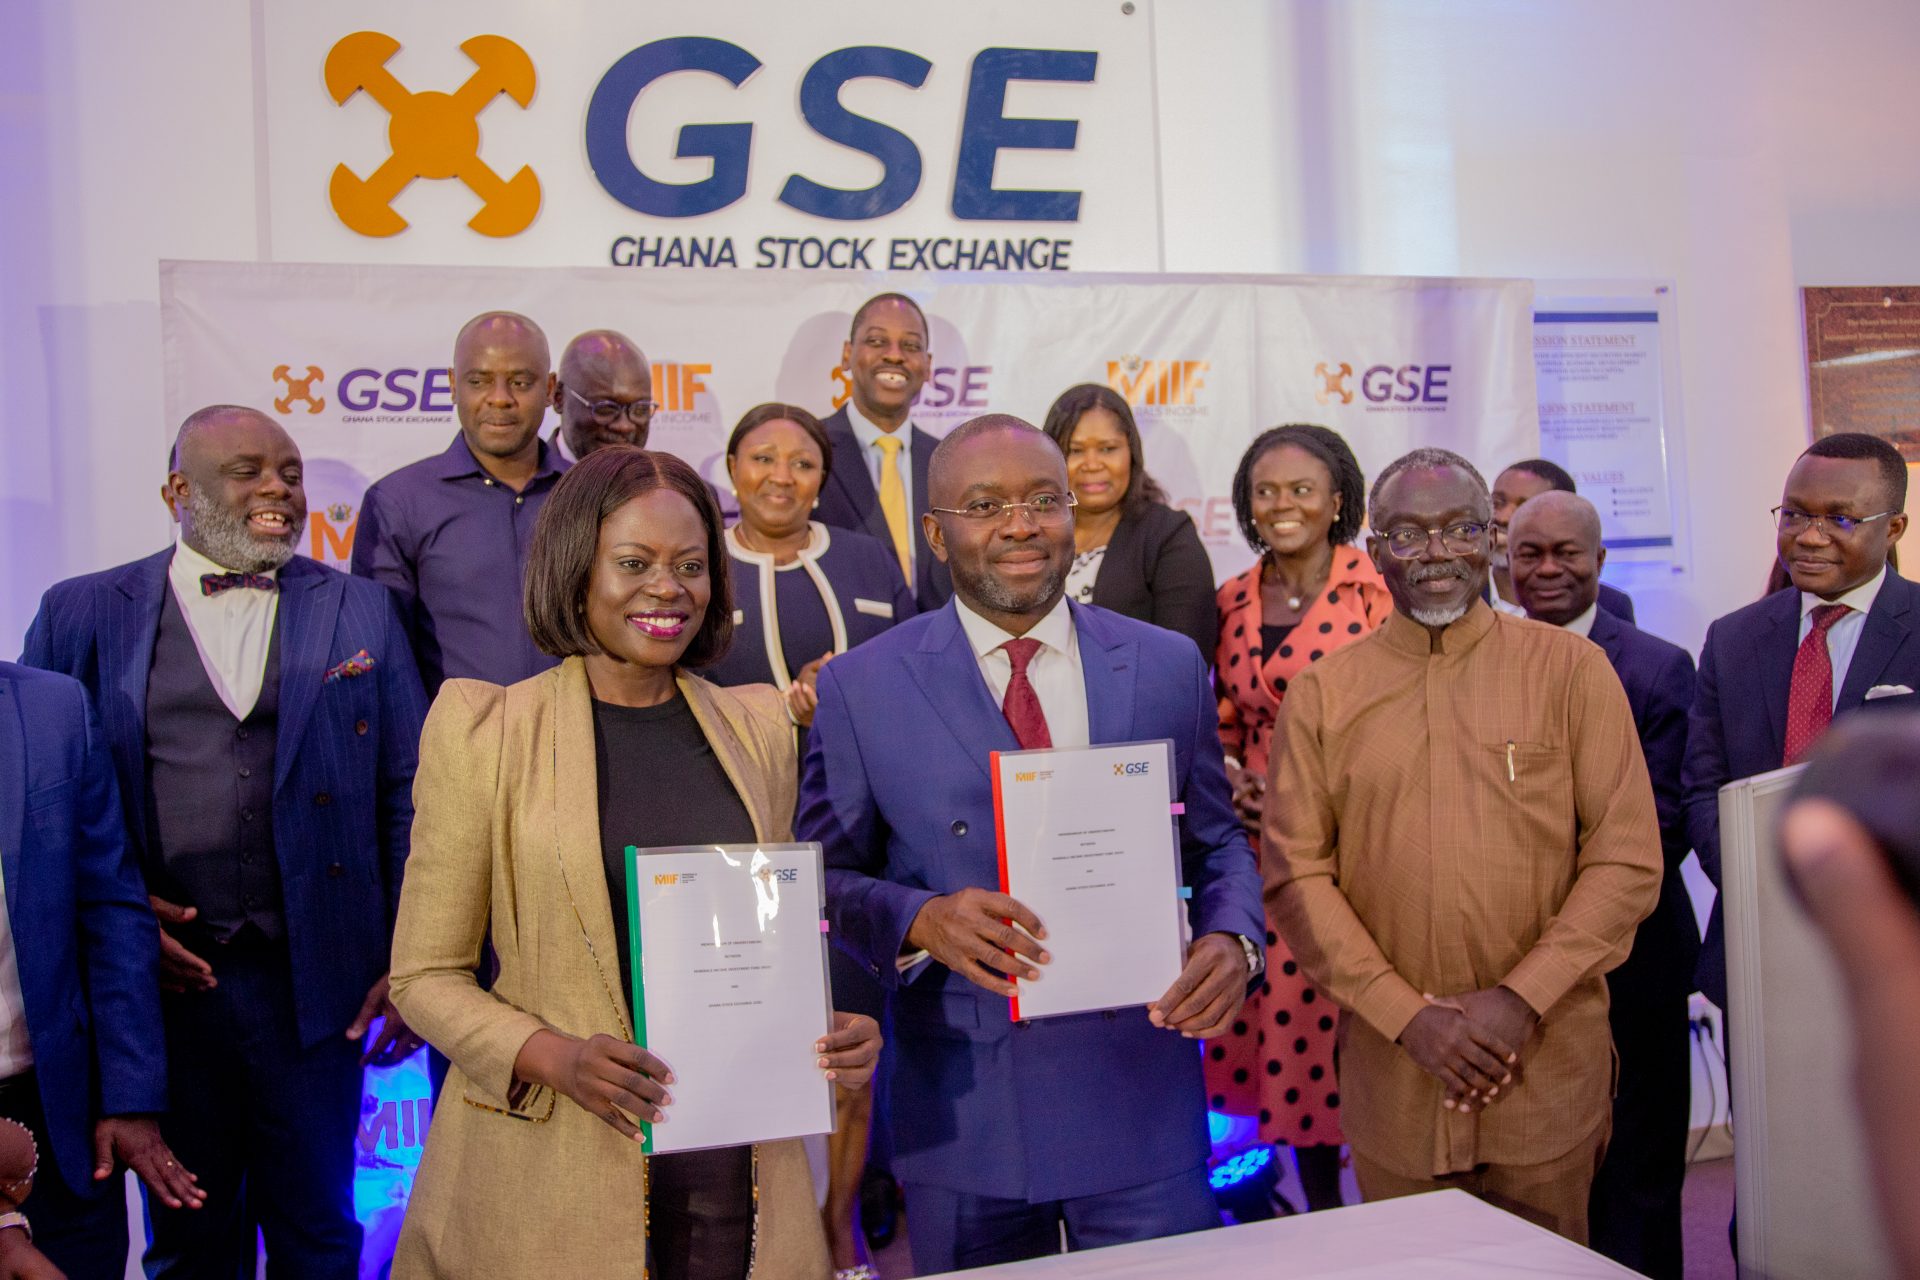 Ghana Stock Exchange Signs MoU with Minerals Income Investment Fund to Increase the Listing of Mining Companies